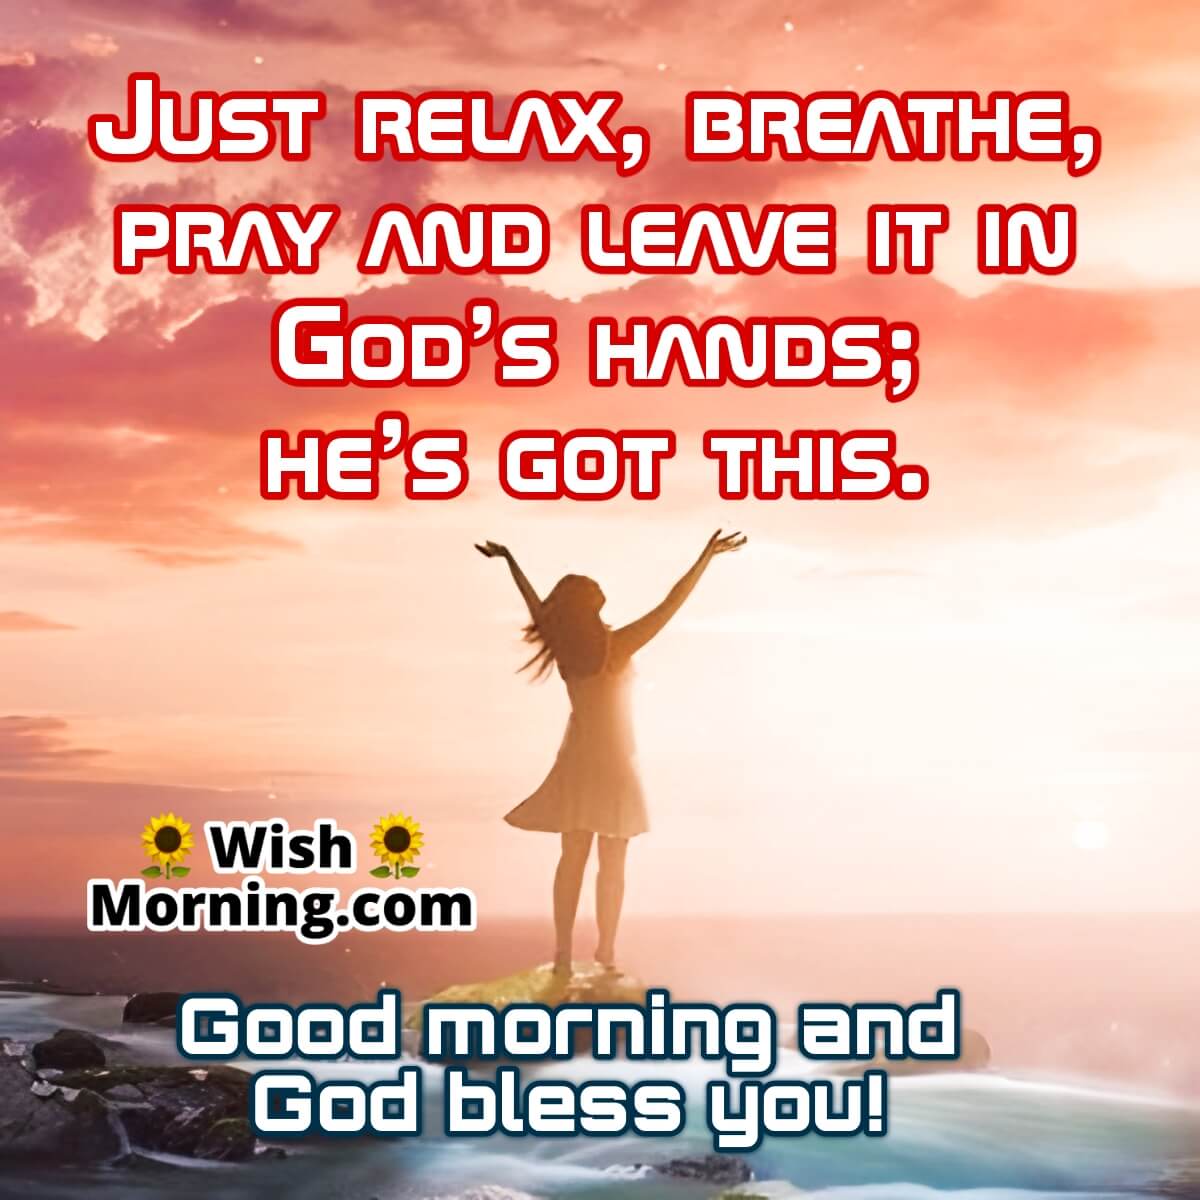 Good Morning And God Bless You!